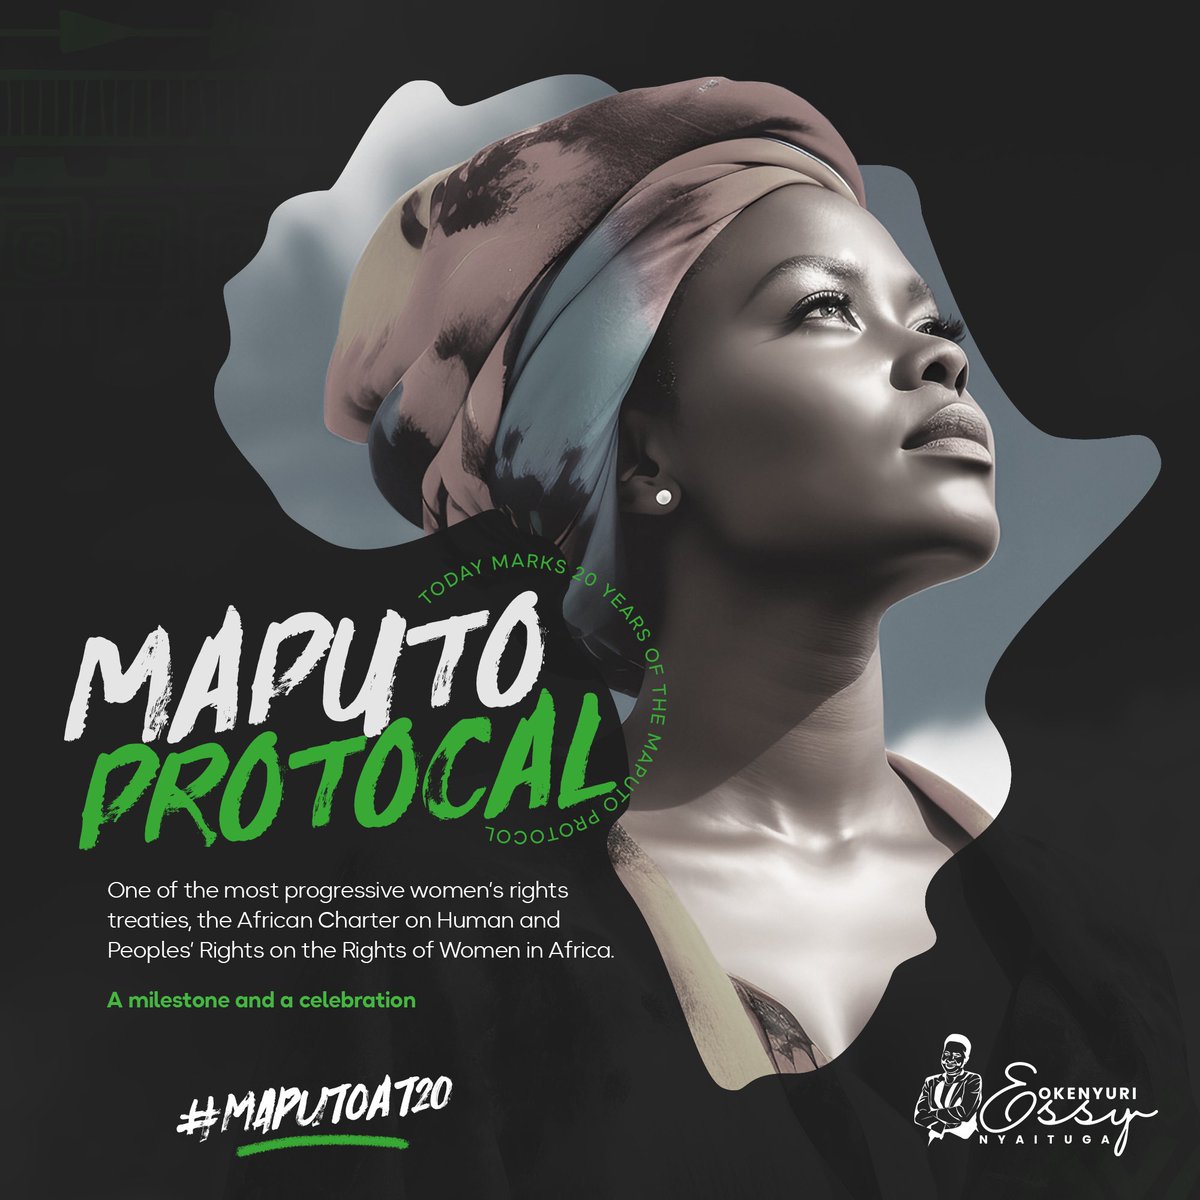 On this 20th Anniversary of the #MaputoProtocol, We are taking stock of investments and actions of stakeholders towards realizing the goals of the Maputo Protocol with a focus on; Ending Violence against Women and Girls (EVAWG), WYFEI, strategic partnerships and legislation.